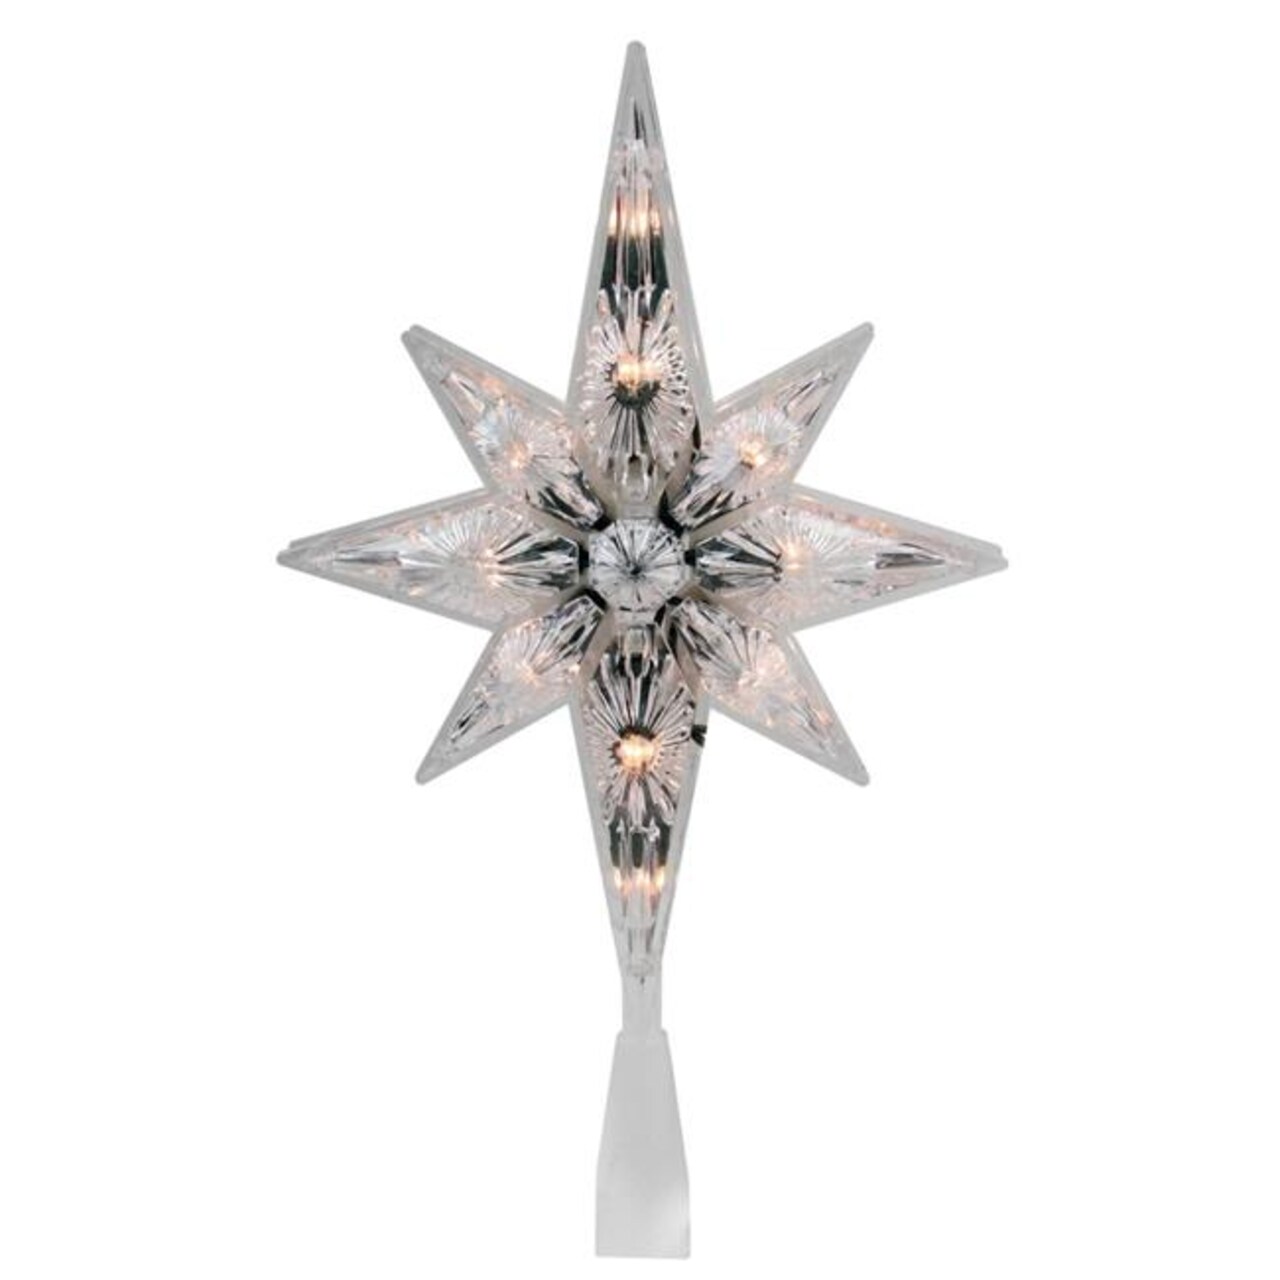 Northlight 32606342 10.75 in. Faceted Star of Bethlehem Christmas Tree Topper - Clear Lights